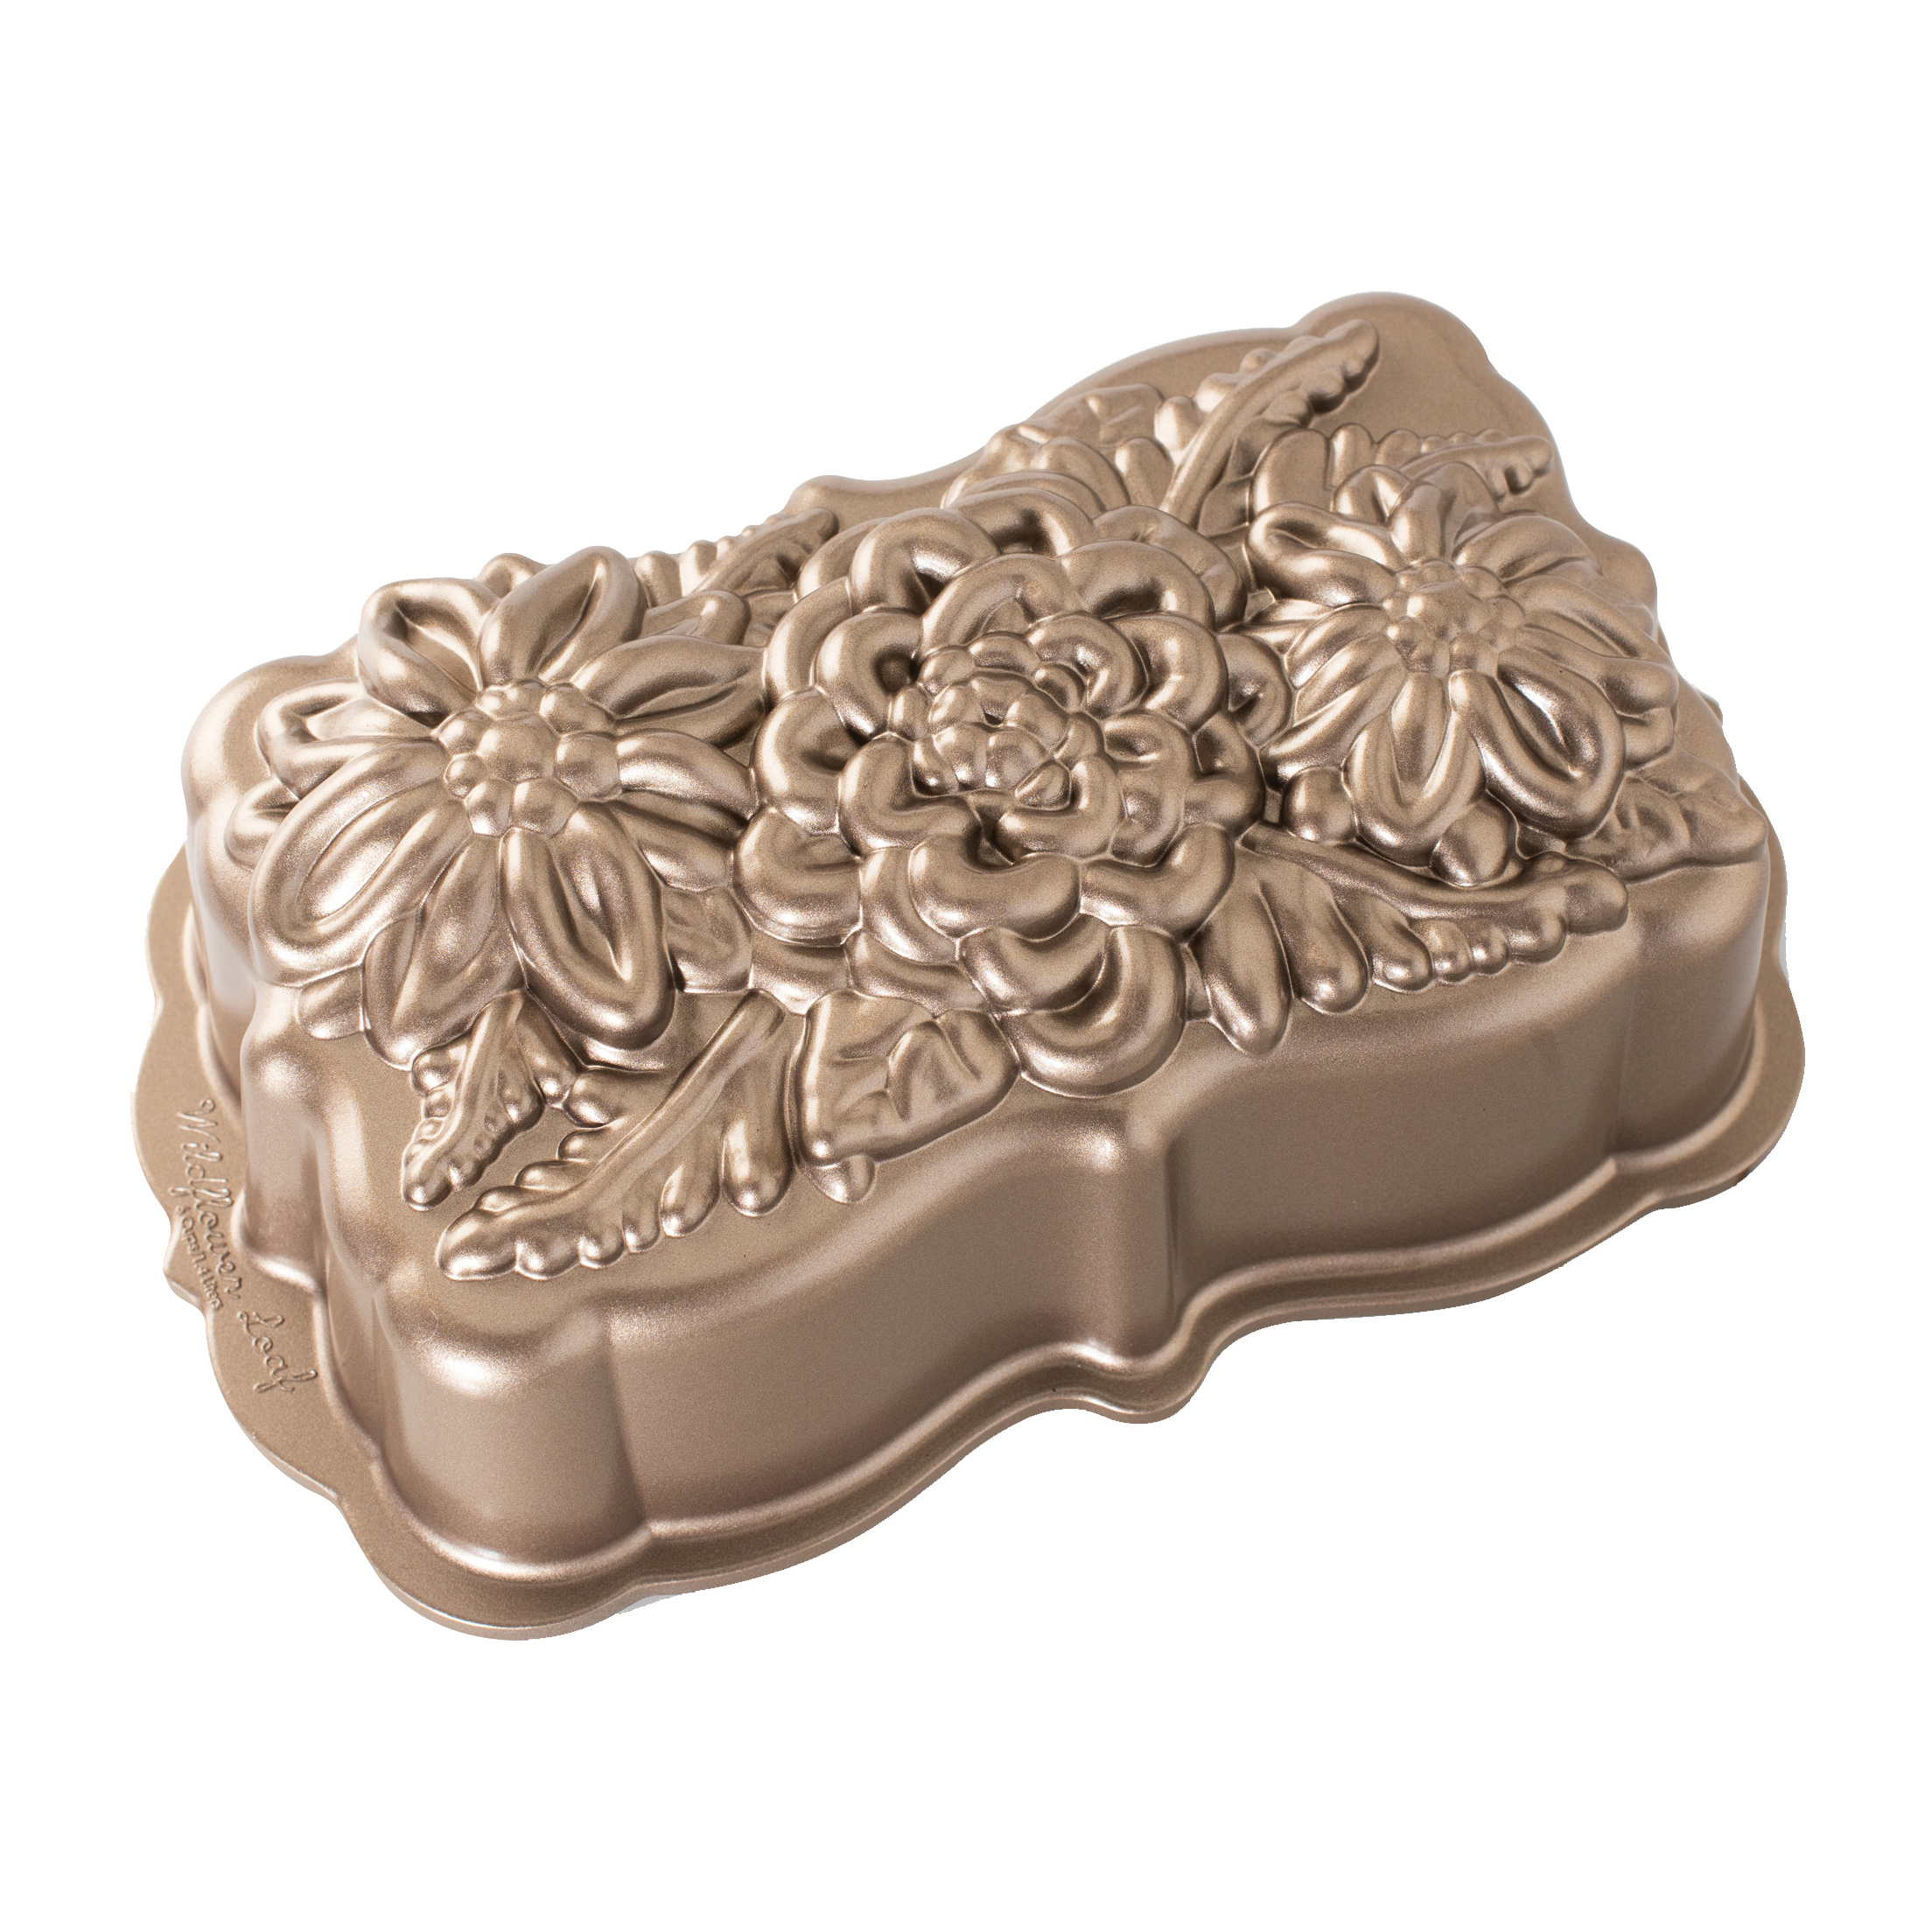 https://www.nordicnest.com/assets/blobs/nordic-ware-nordic-ware-wildflower-loaf-baking-tin-14-l/515972-01_1_ProductImageMain-80530a130f.jpeg